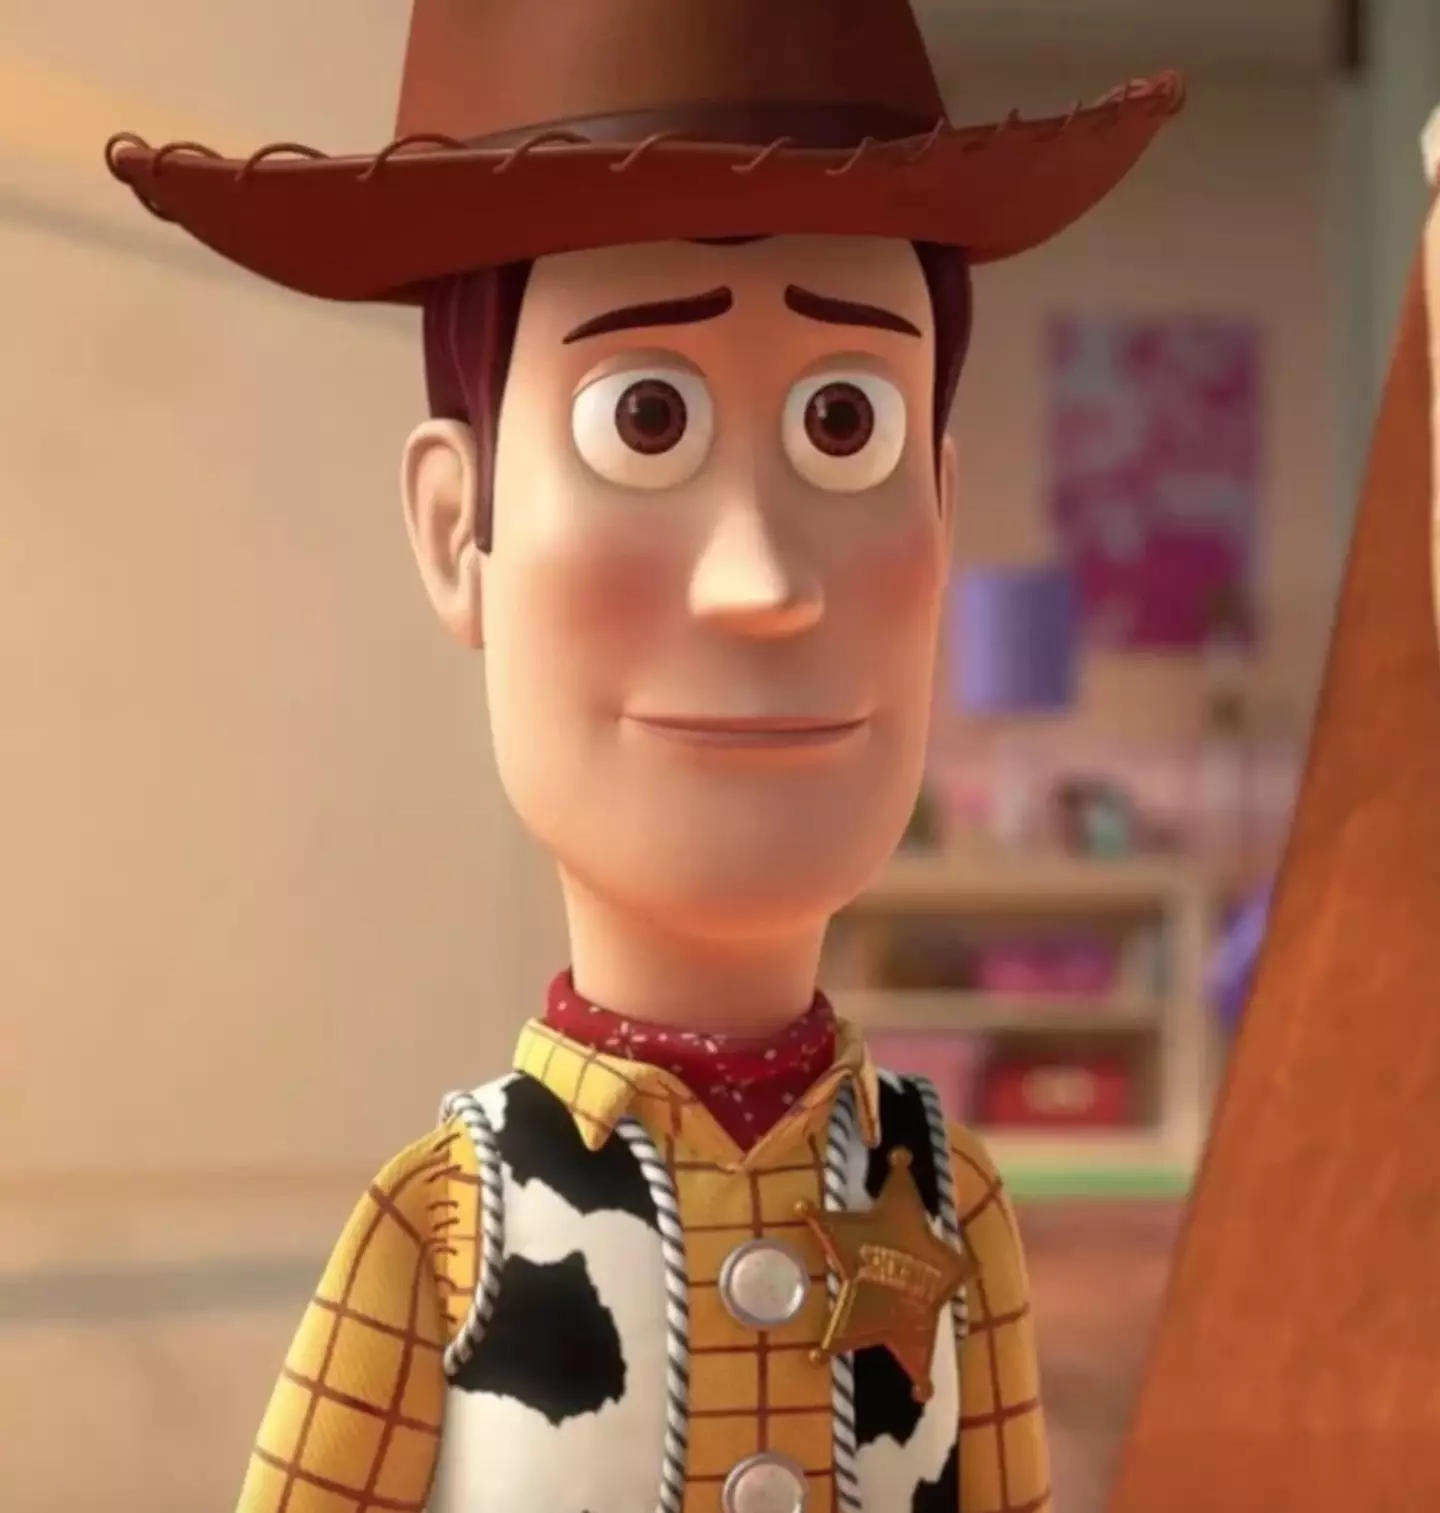 Jim Hanks has been the voice of Woody in toys, theme park attractions, video games and spin-offs. Credit Pixar